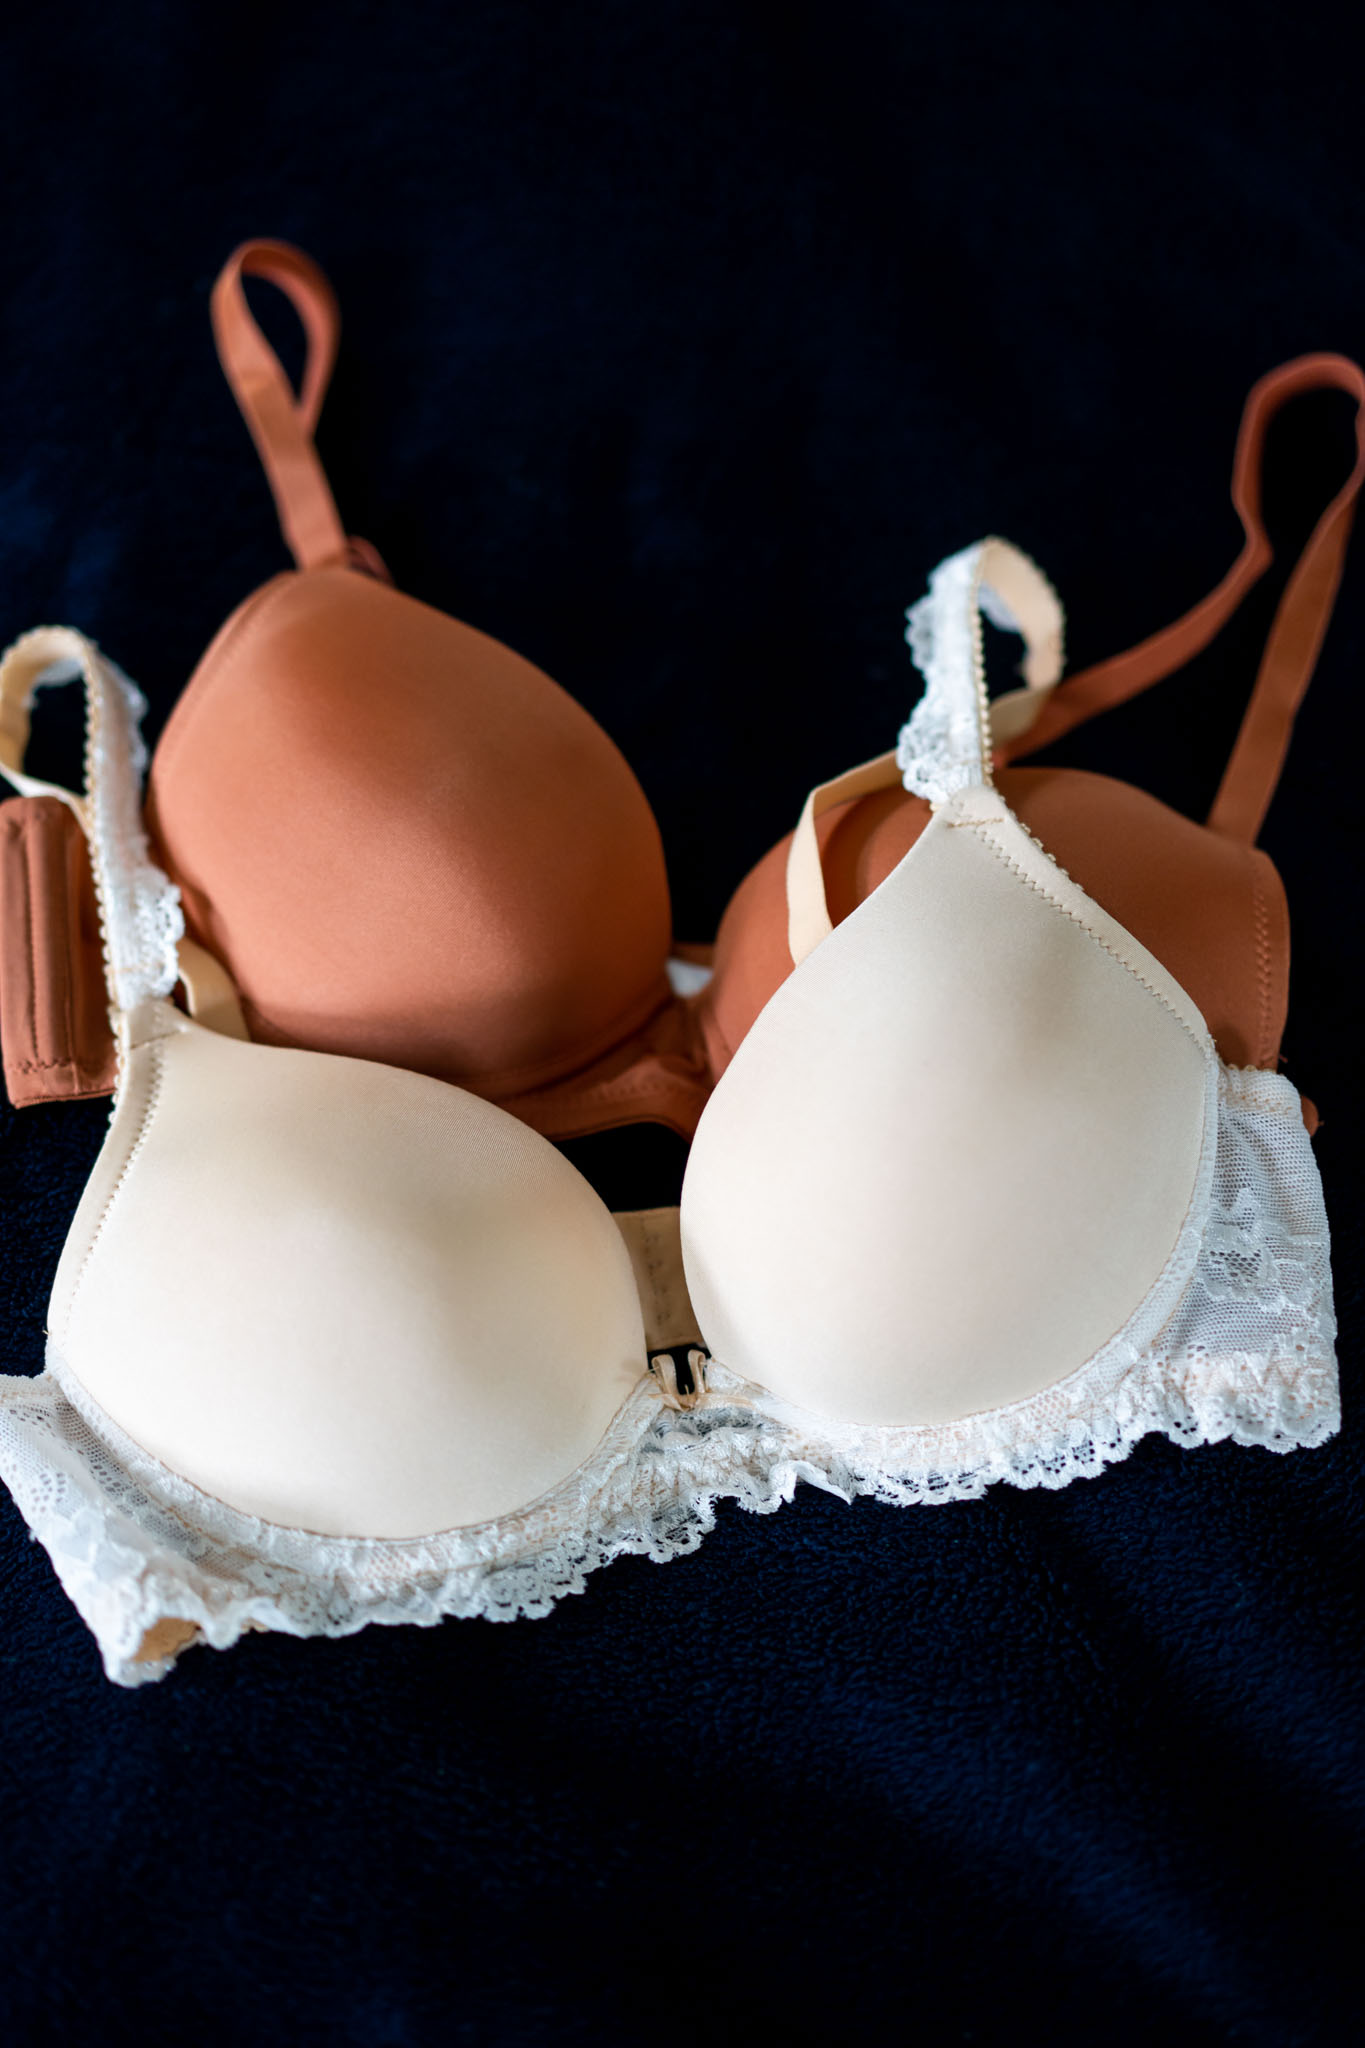 BEST BRA 2022, ALL IN ONE BRA, HOW TO SET UP